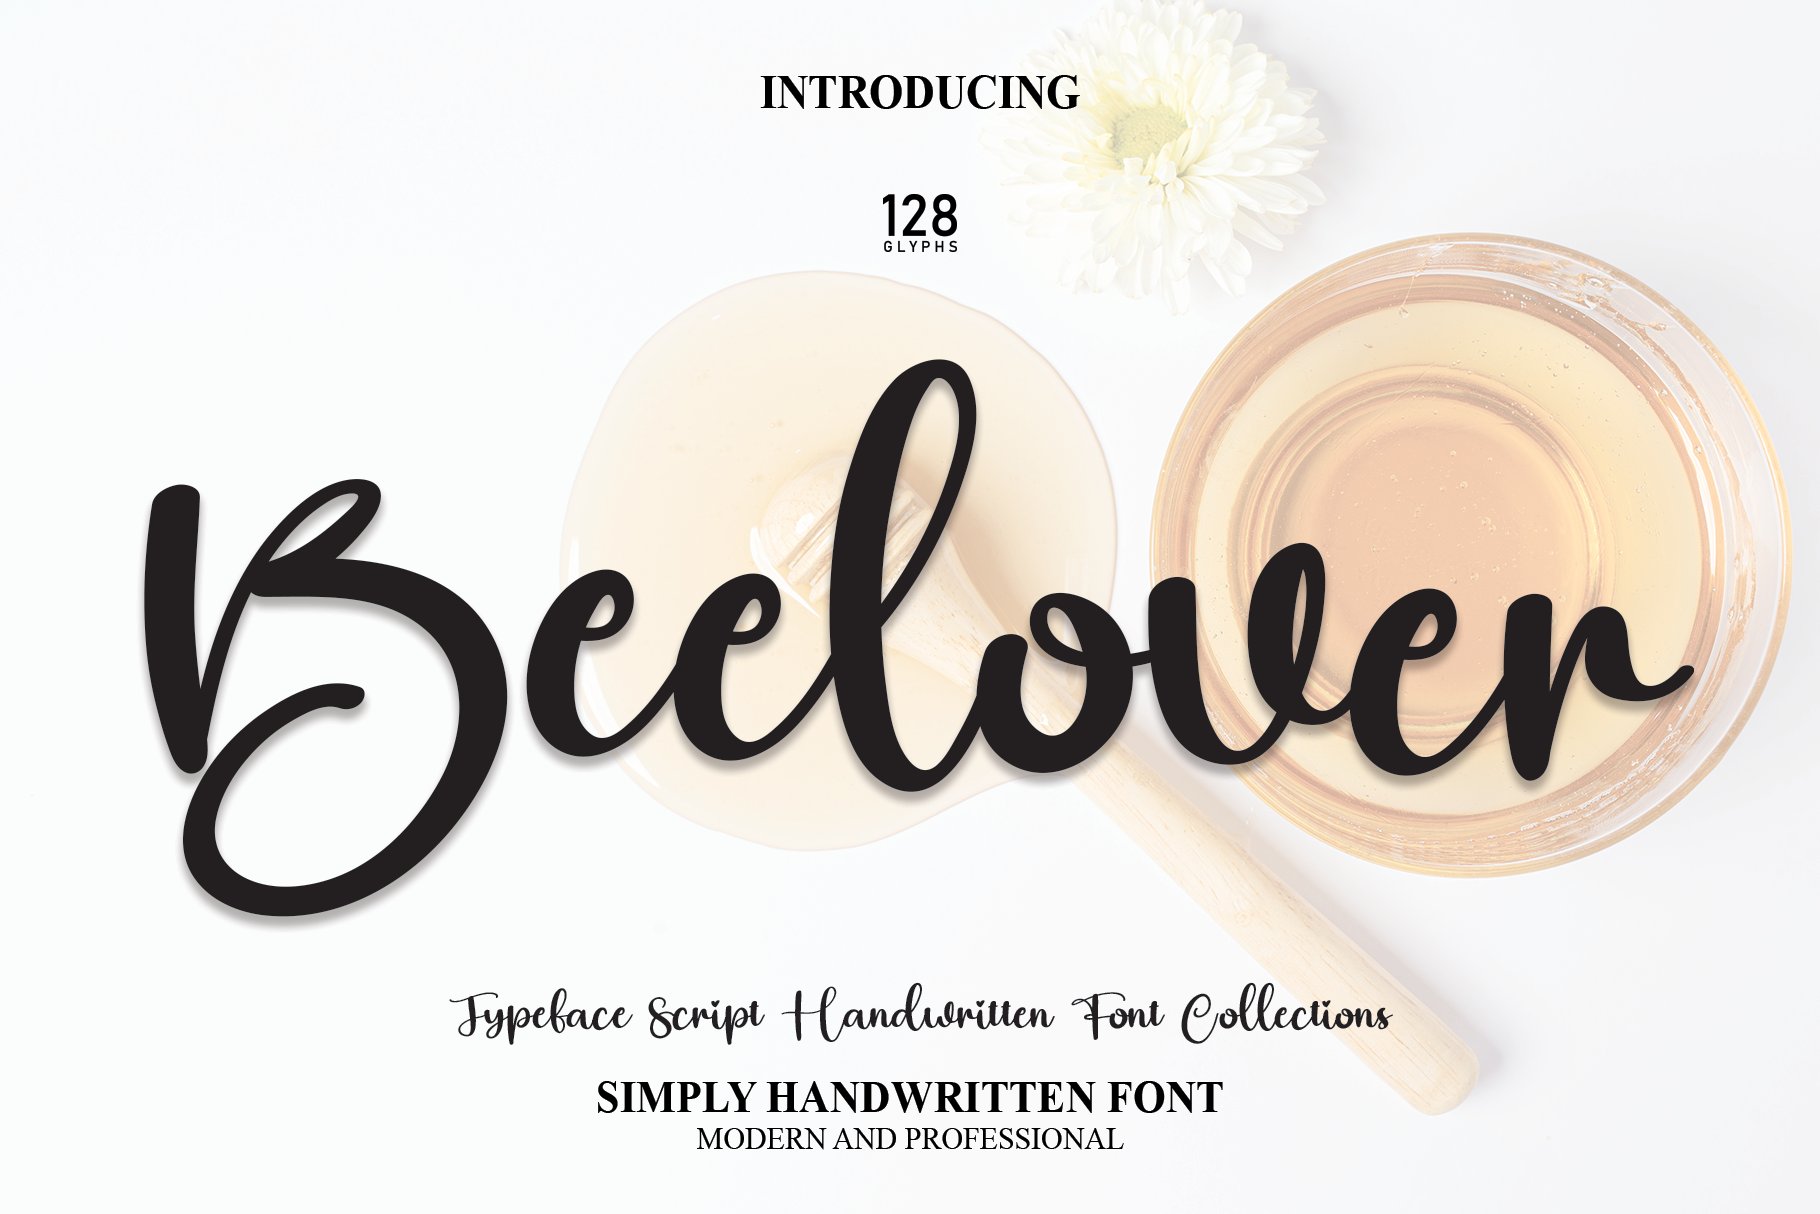 Beelover | Script Font cover image.